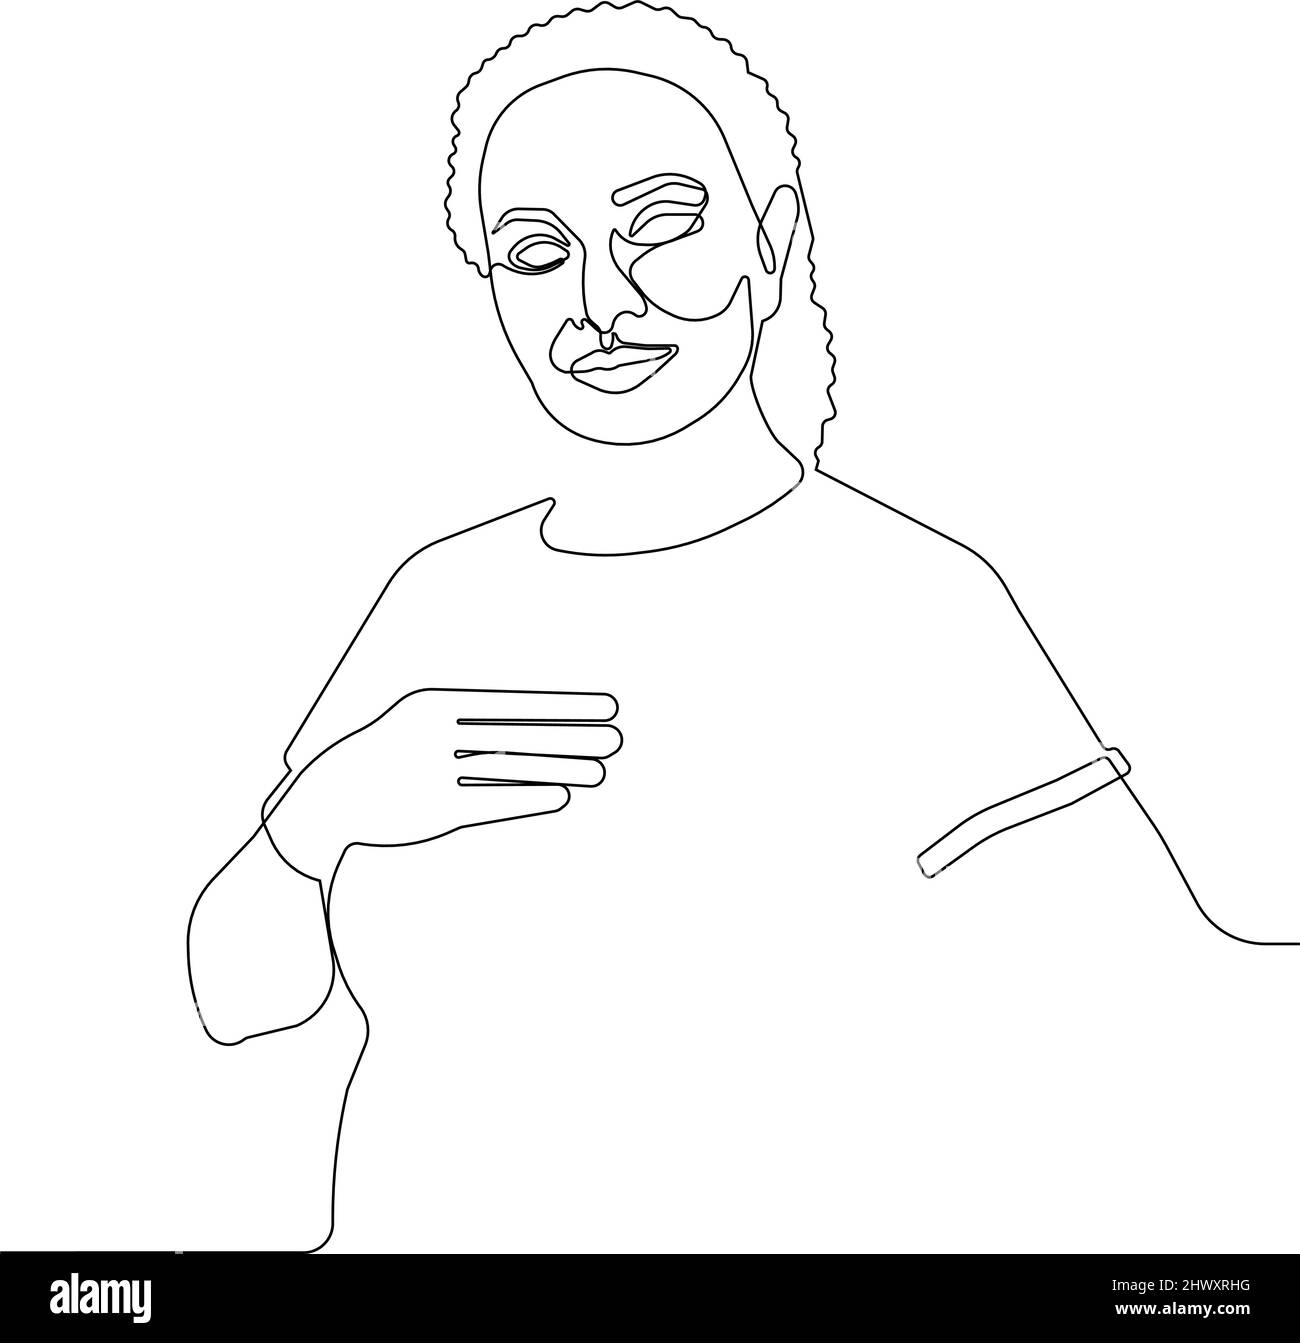 Minimalistic Female Face One Line Drawing Stock Vector